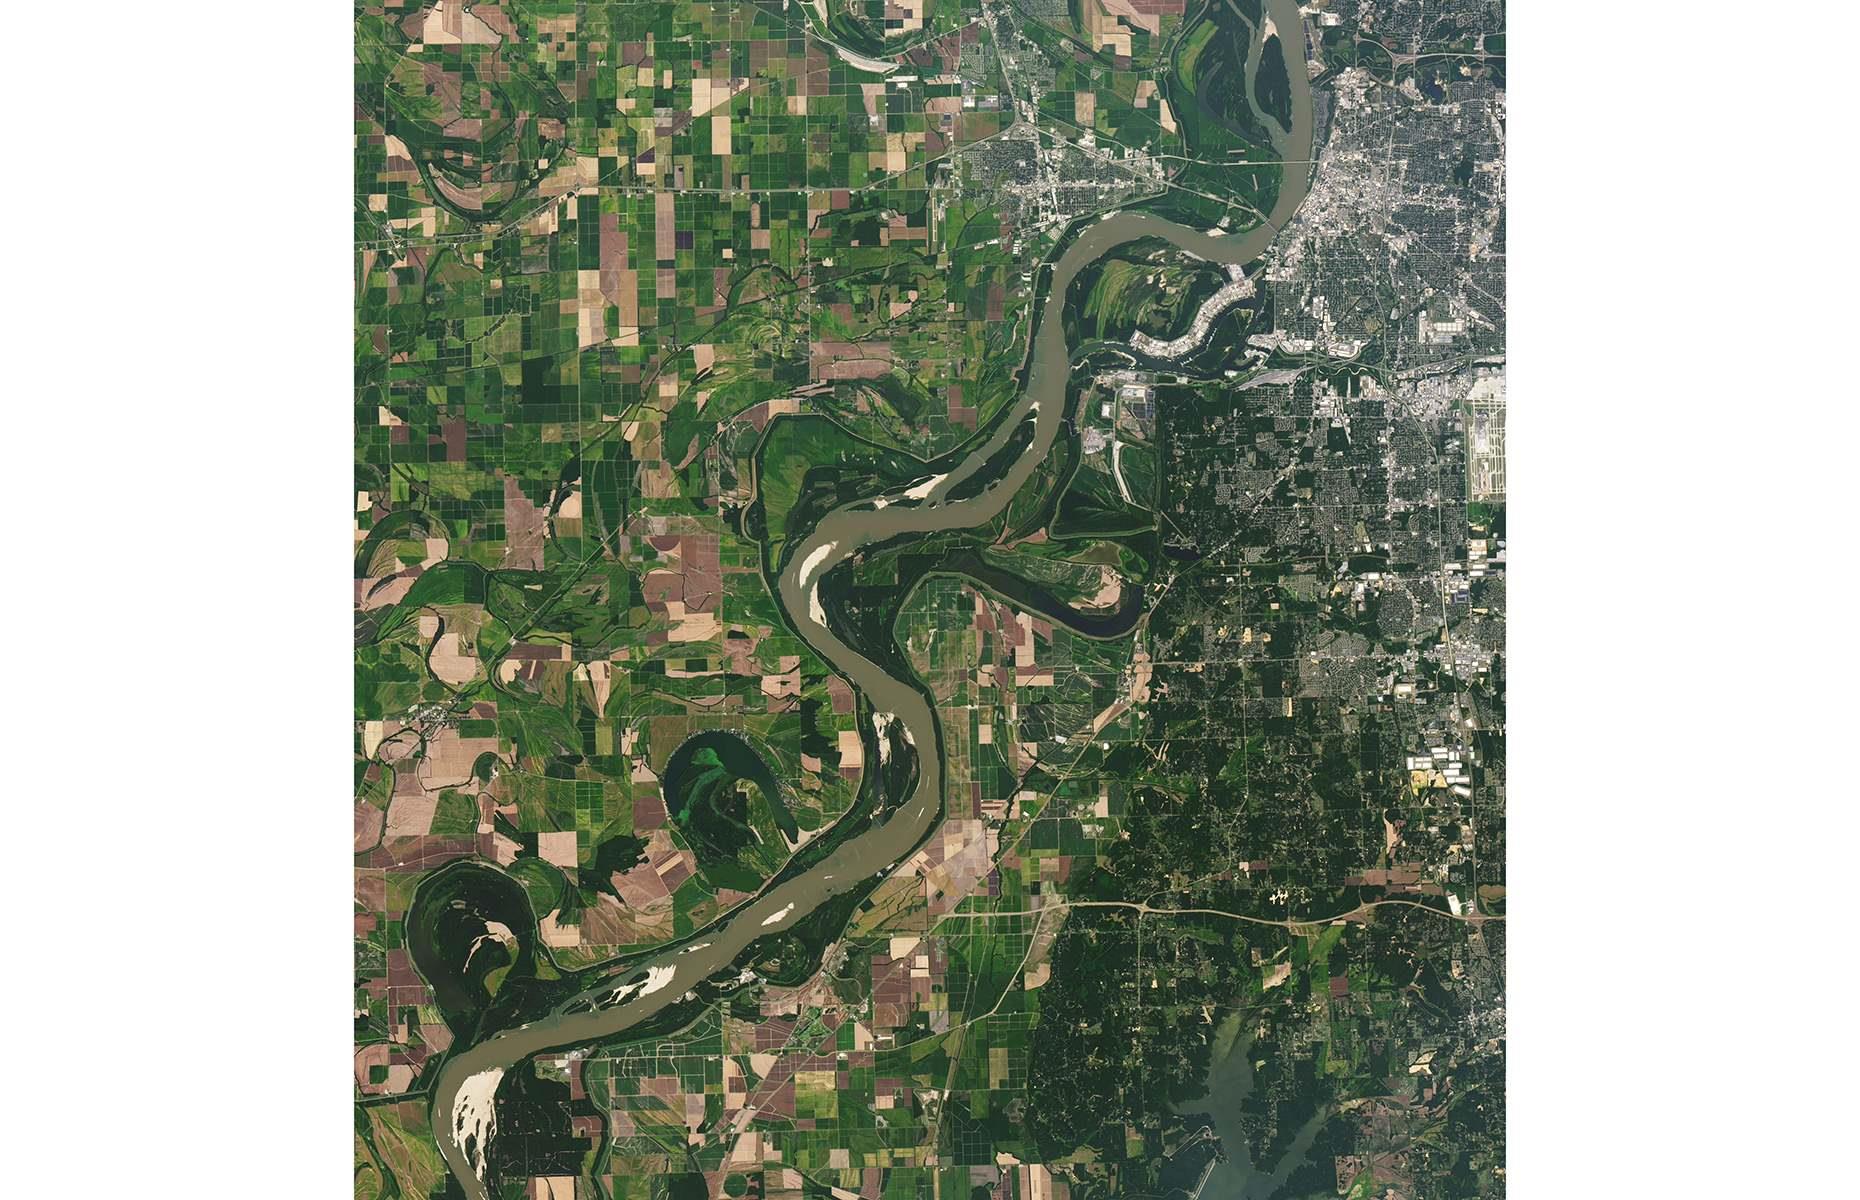 <p>When measured with its major tributaries, including the Missouri River and the Ohio River, the Mississippi is the longest river in North America. Its drainage basin encompasses a whopping 1.2 million square miles (3.1m sq km) – about an eighth of the entire continent. Rising in Minnesota from Lake Itasca, the Mississippi River flows almost due south before ending at the Gulf of Mexico, around 2,350 miles (3,766km) from where it started. With its tributaries, the great river drains 31 US states and two Canadian provinces to some degree. It’s captured here in September 2021 by NASA.</p>